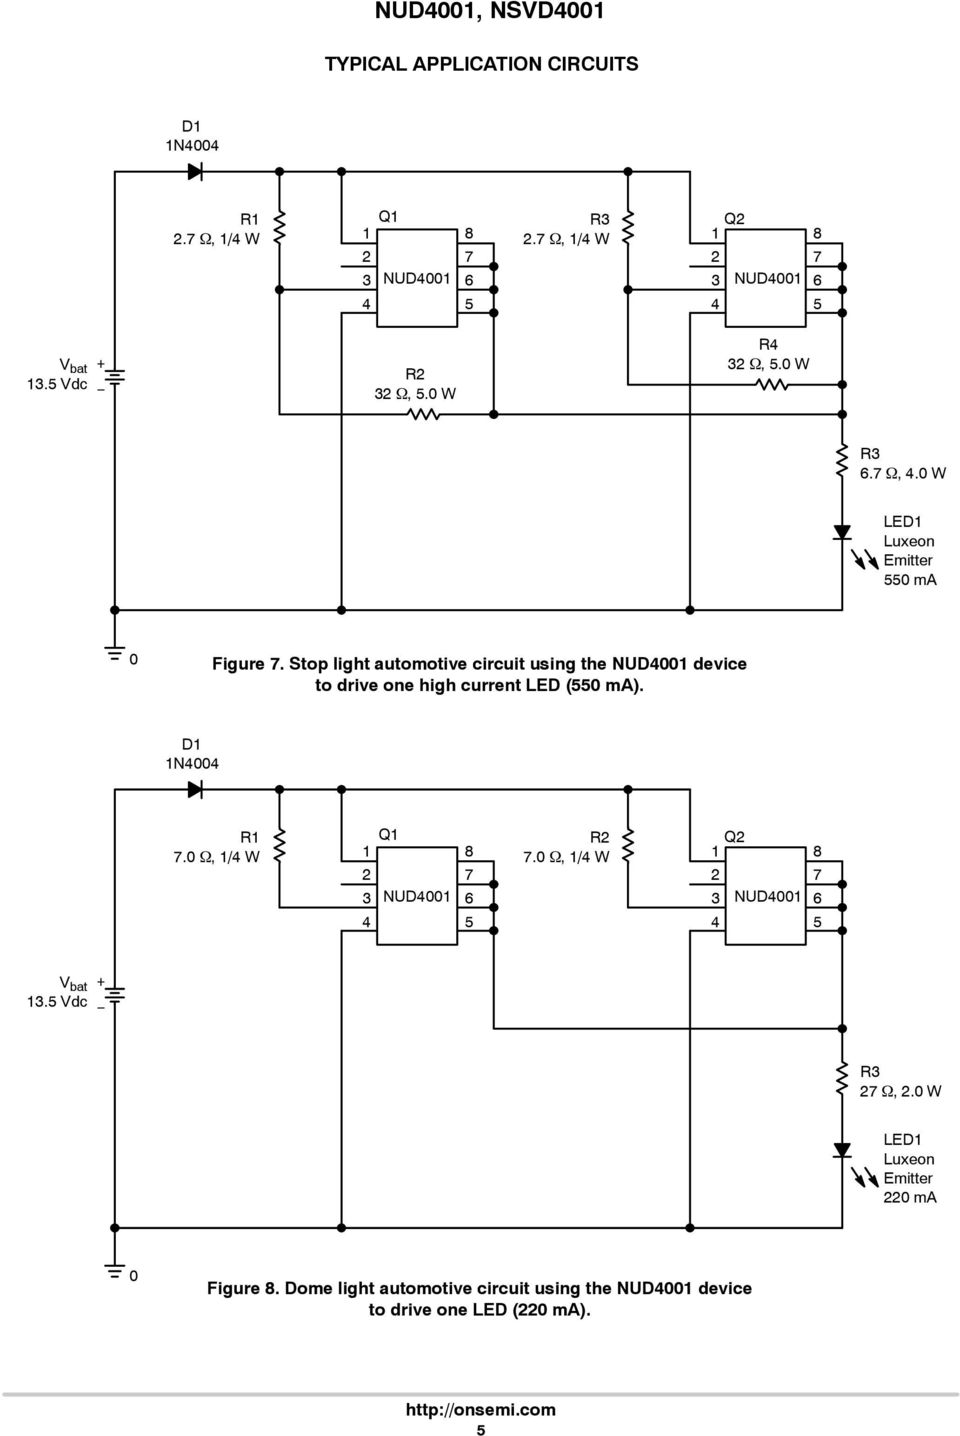 Stop light automotive circuit using the NUD device to drive one high current LED ( ma). D N R.